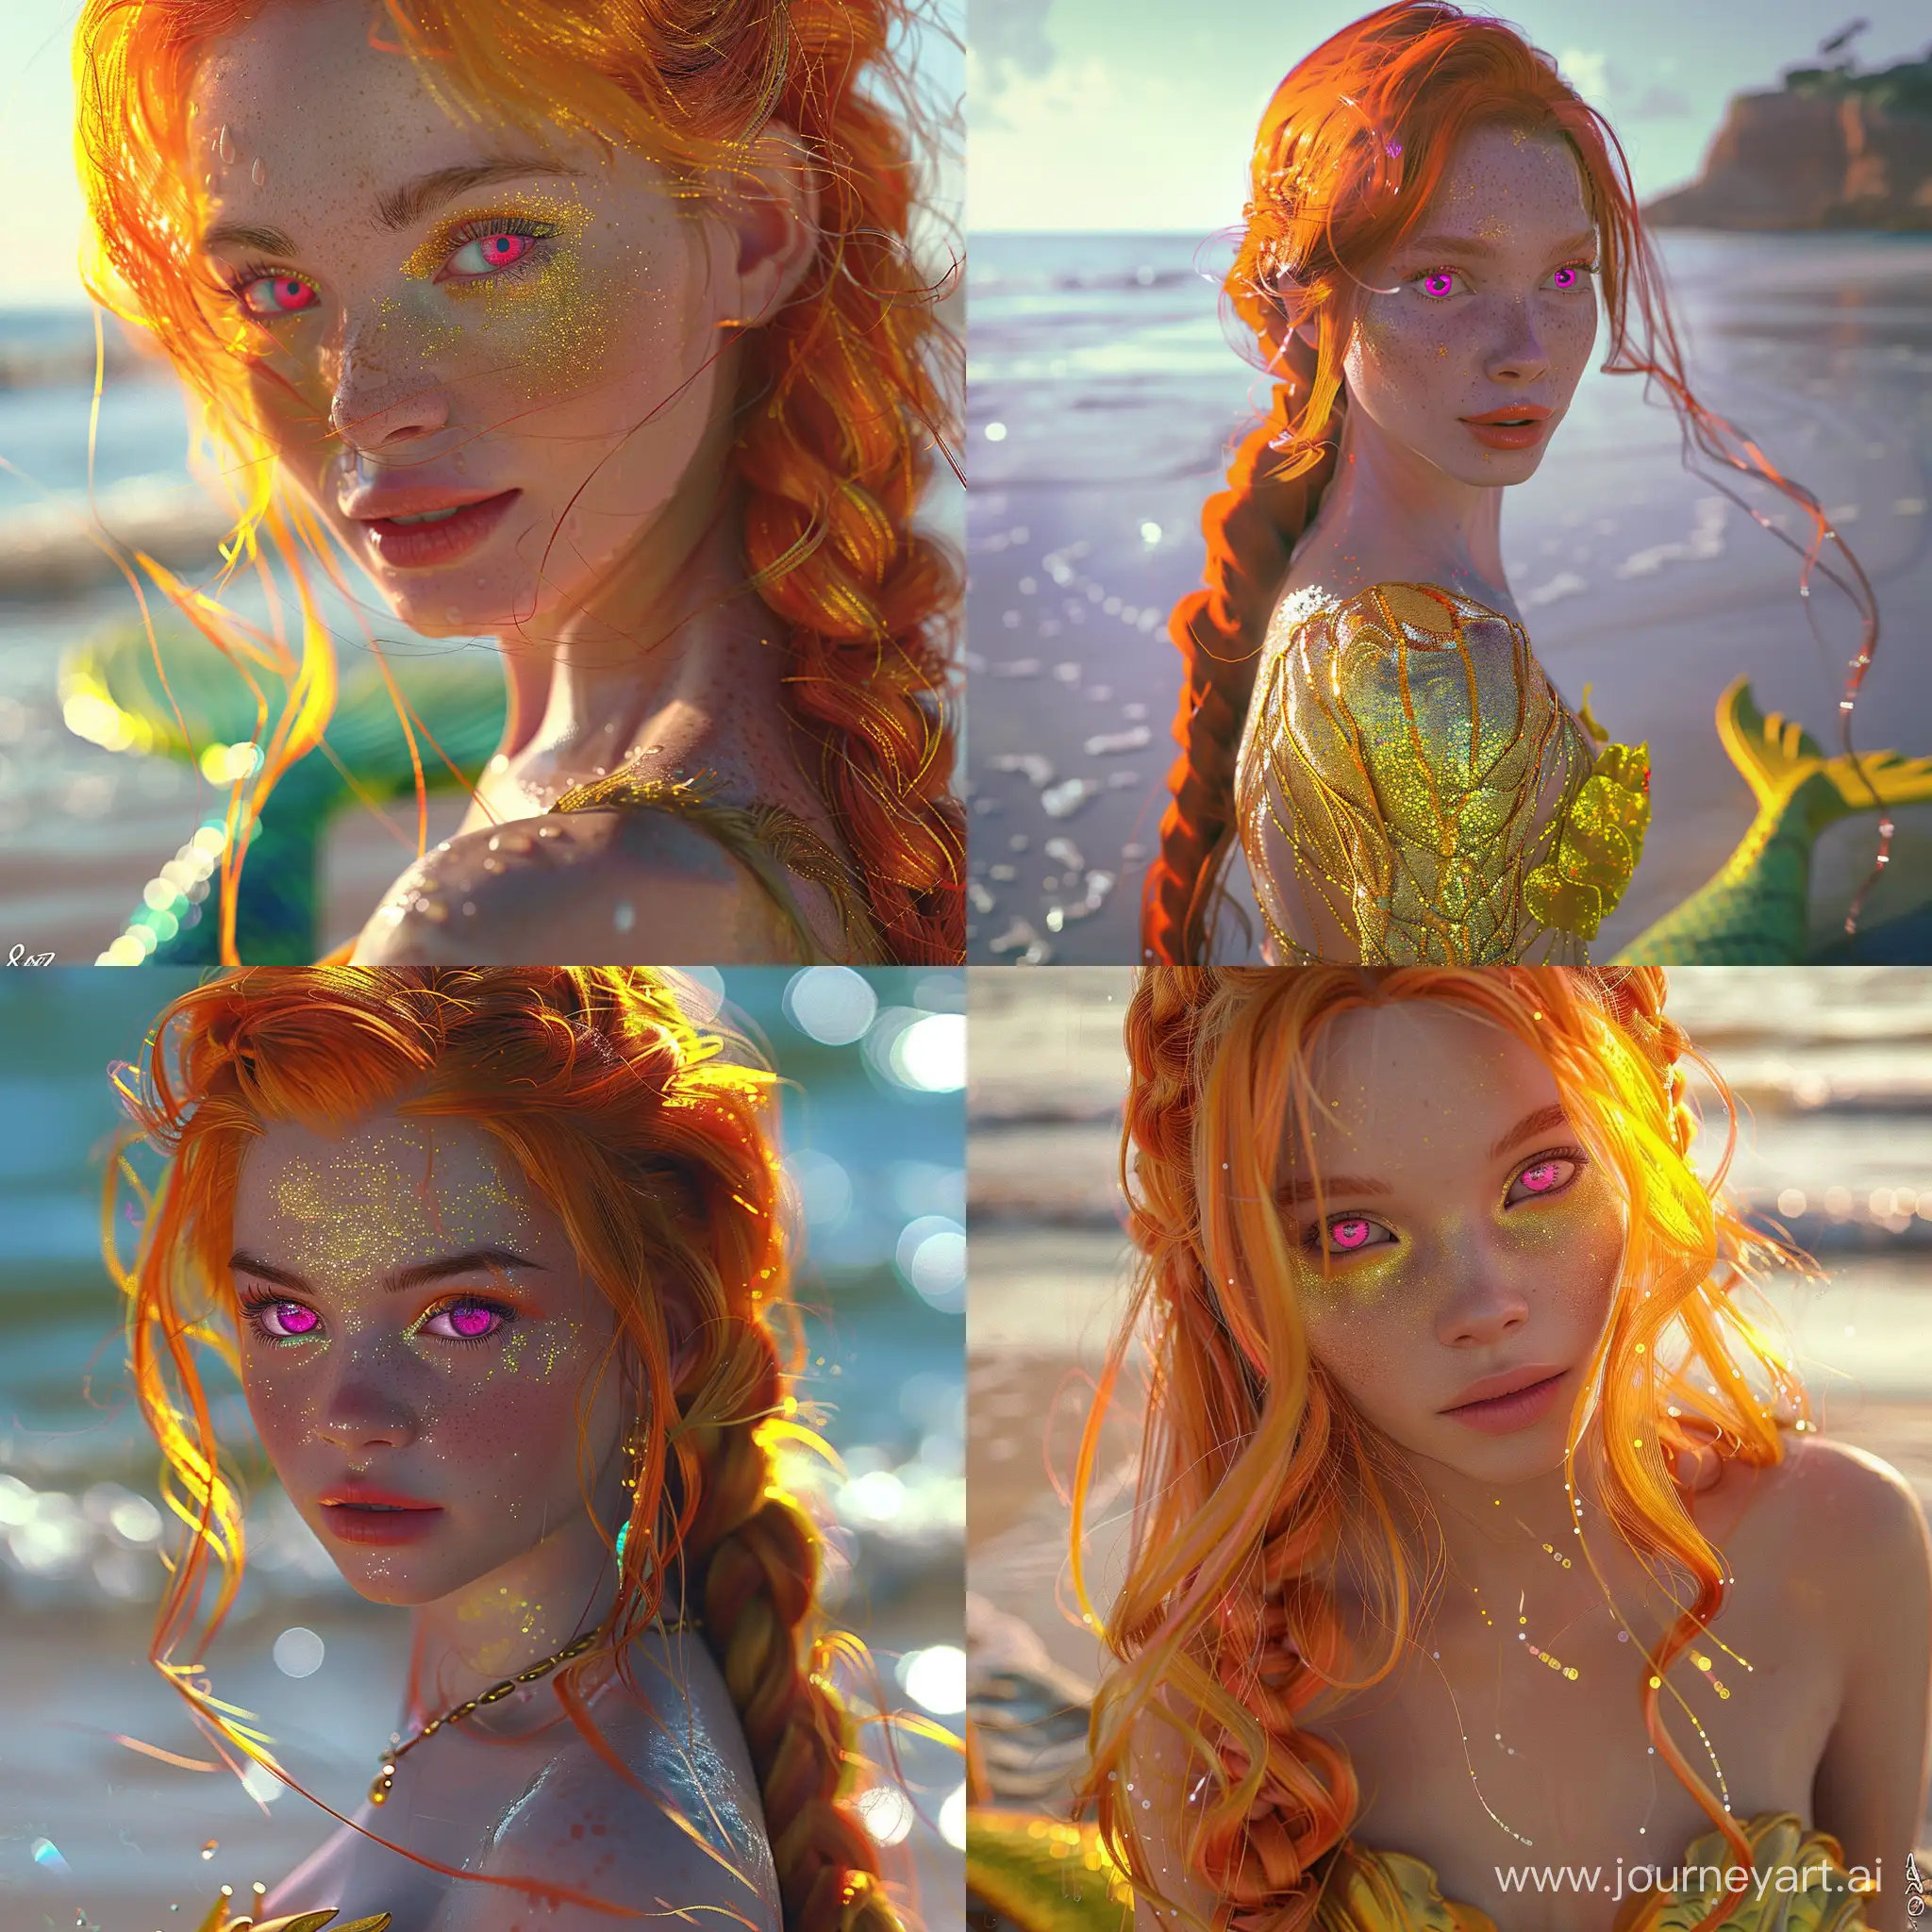 Solitary-Caucasian-Woman-with-Orange-Hair-and-Pink-Eyes-Mermaid-at-Shimmering-Beach